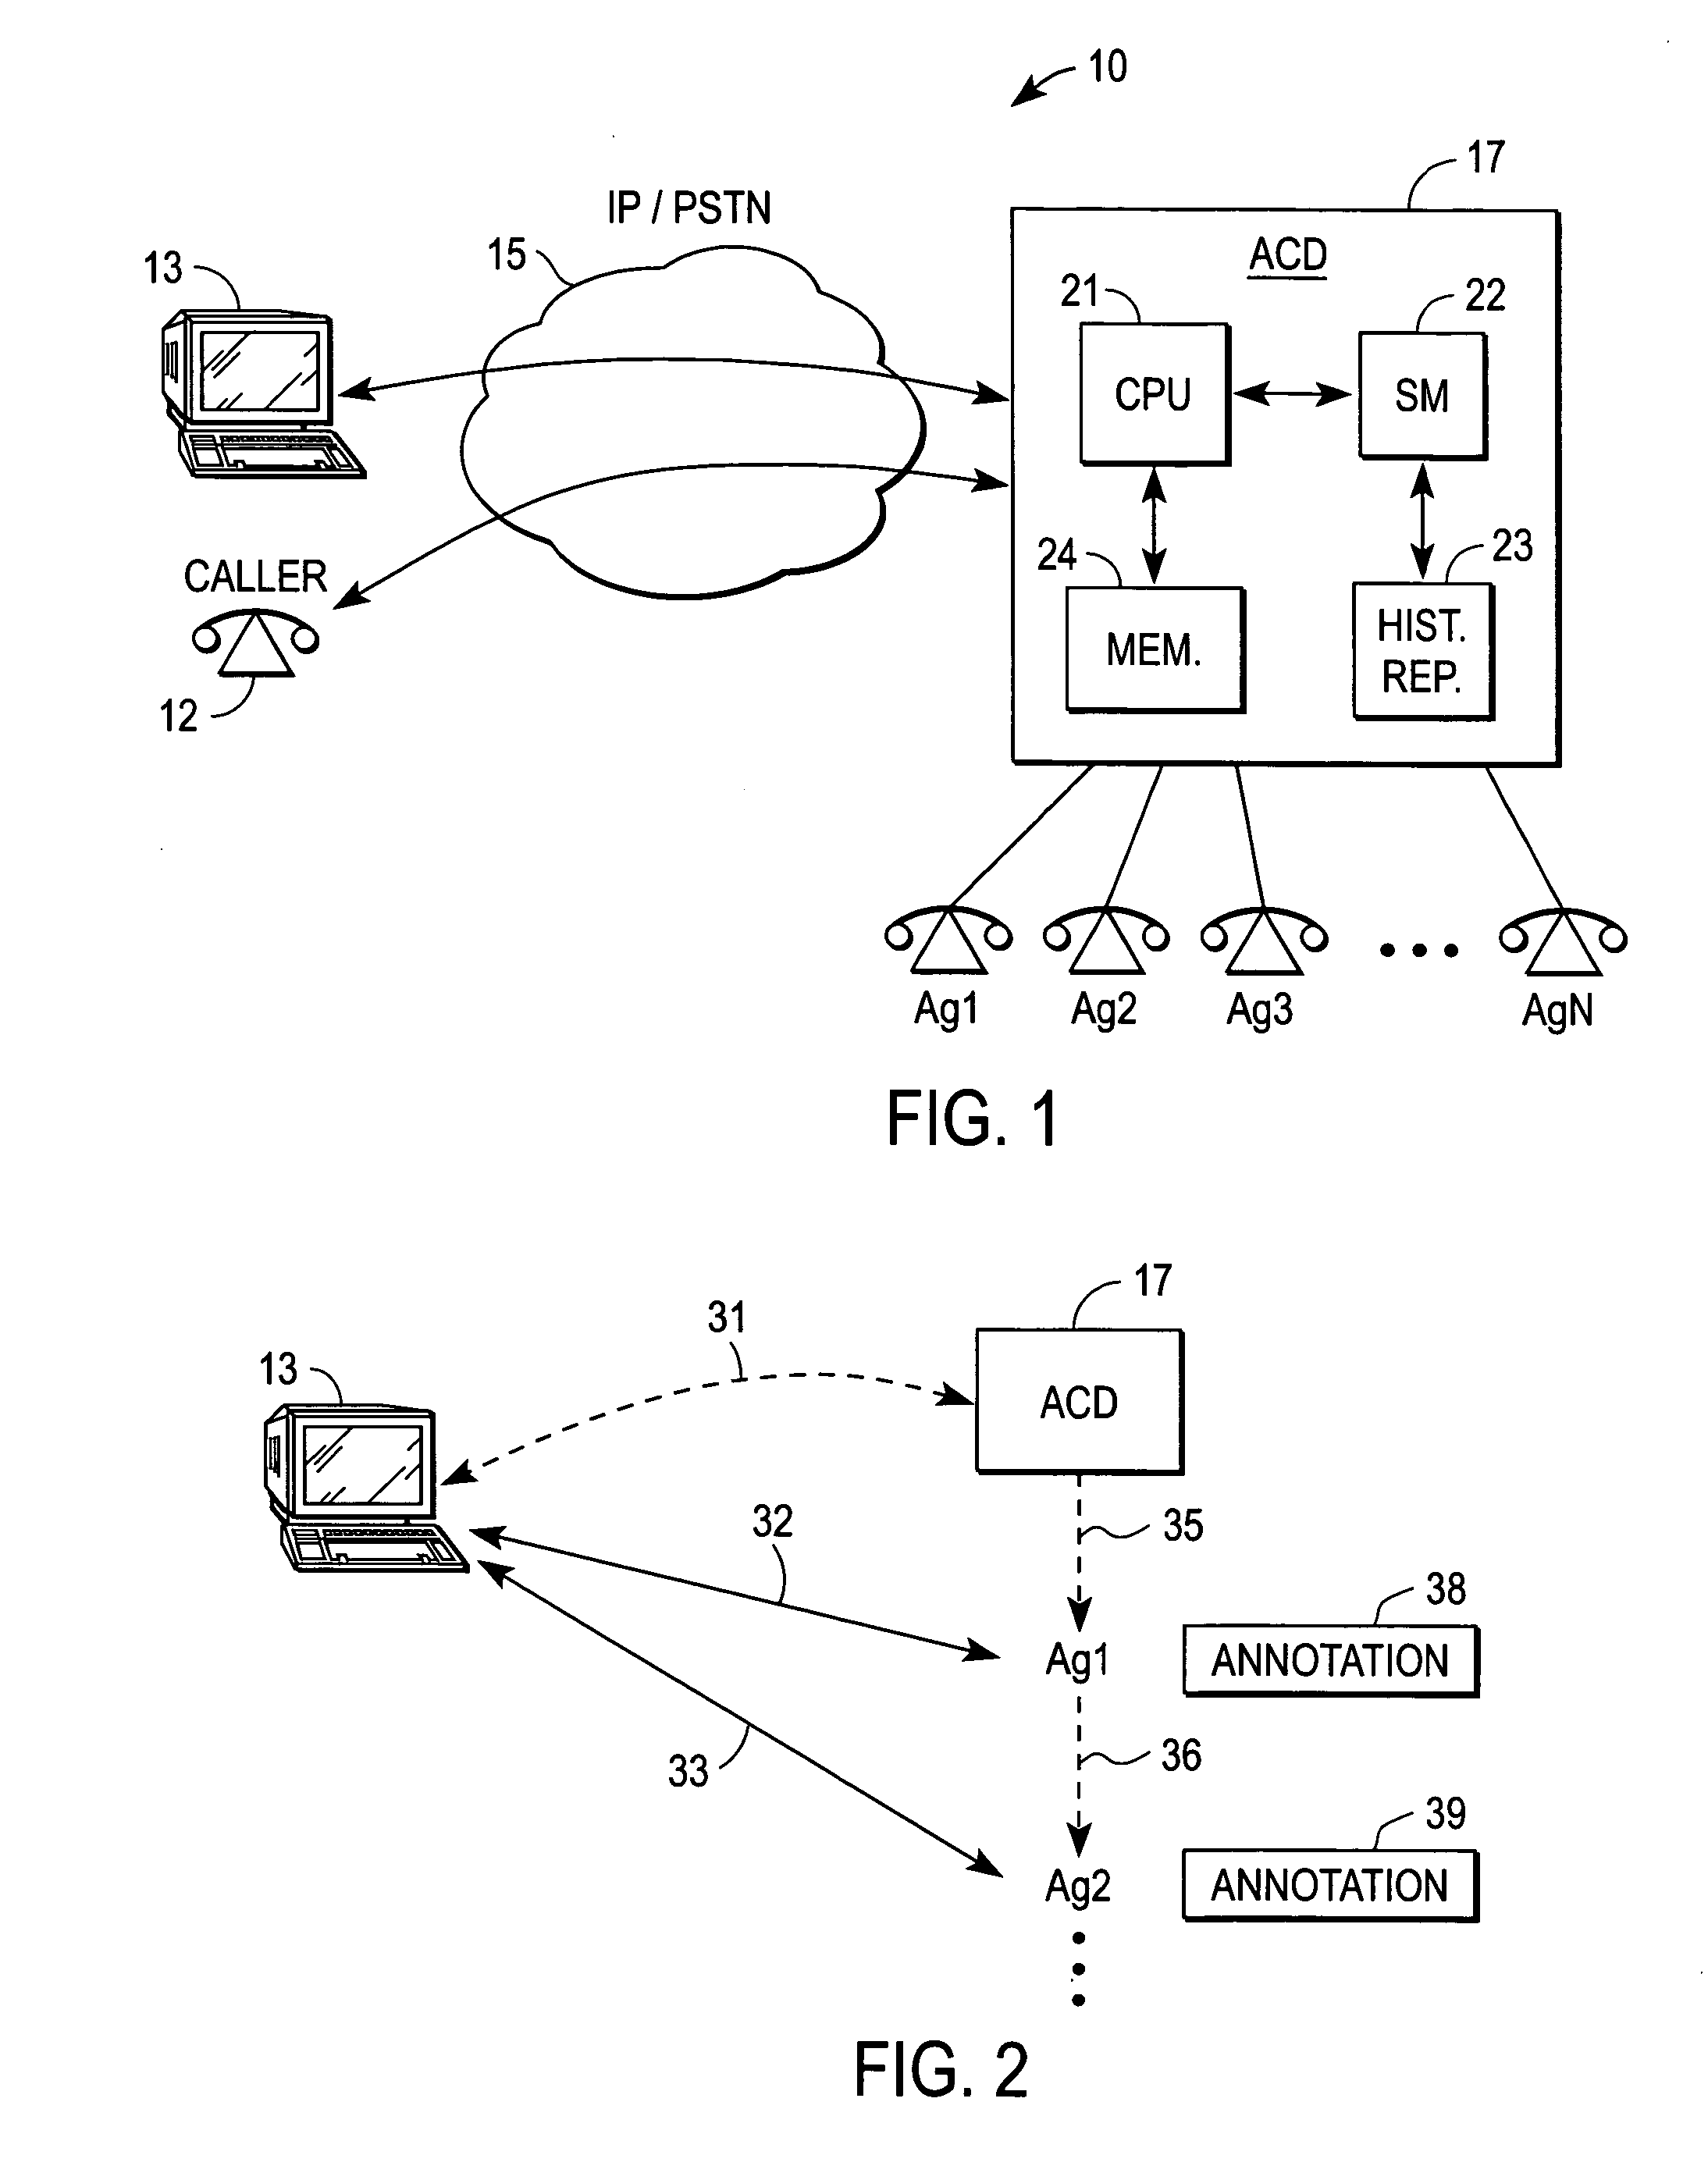 System and method for return to agents during a contact center session